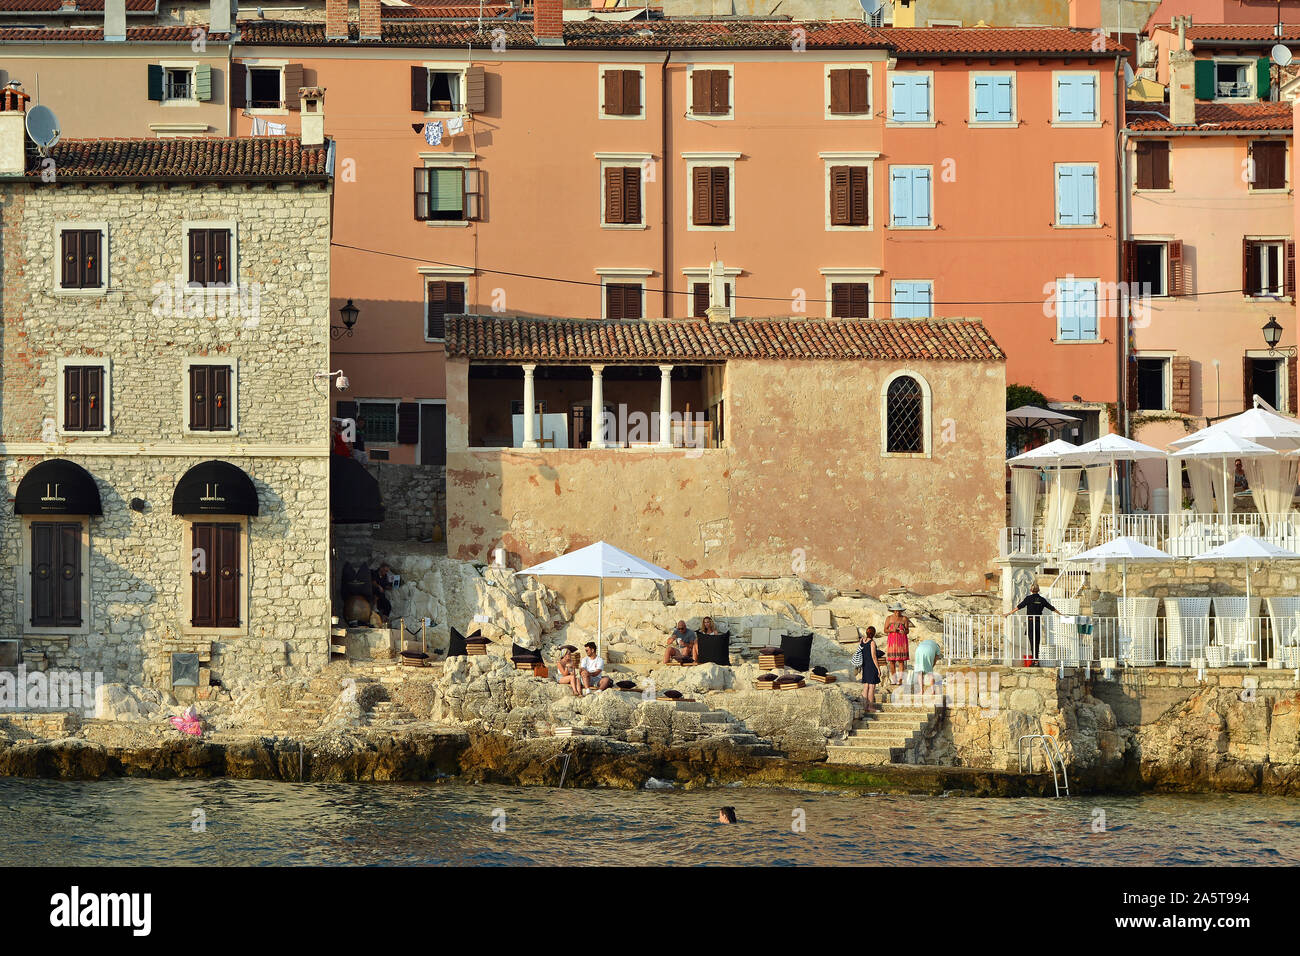 Rovinj, Croatia, August 24: Citizens and tourists sunbathe, swim and relax on the stone steps of the beach near the walls of the old town of Rovinj, A Stock Photo